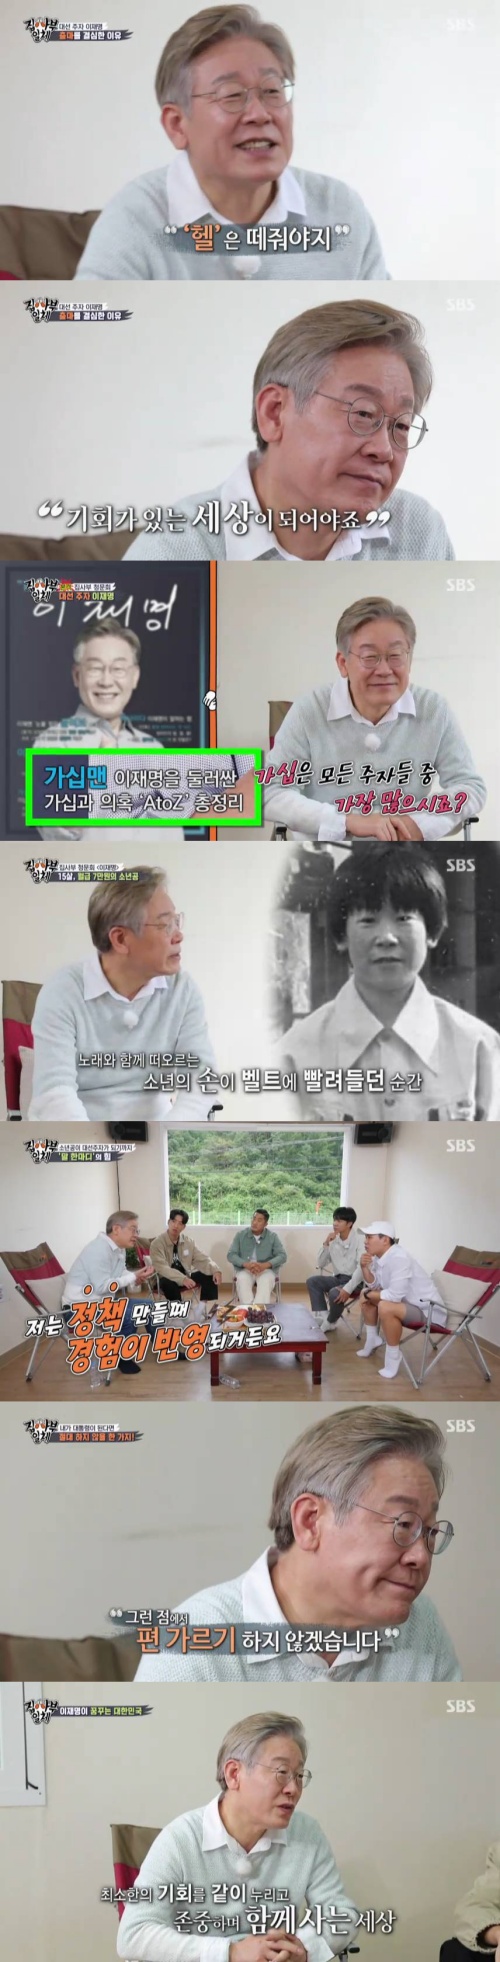 SBS All The Butlers For feature continued to lead to the hot reaction of viewers and became the number one TV viewer ratings in the same time zone.According to Nielsen Korea, a TV viewer rating company, SBS All The Butlers TV viewer ratings in the metropolitan area, which was broadcast on the 26th, attracted attention with 10.1% and 2049 target TV viewer ratings, which are topical and competitive indicators, ranked first with 4.1%.Top TV viewer ratings per minute soared to 13.5 per cent.Lee Jae-myung, the governor of Gyeonggi Province, appeared as master on the day of the special feature of For runner after last week.The place where the members met Lee Jae-myung was Andong Station.Lee Jae-myung, who spent his childhood at Andong Station, said, I wanted to show you what it is. It is not really rough, it is very timid and emotional.He knew me as a very rough person, and it was an opportunity to show that I was not such a person. He has attracted attention by revealing the various issues surrounding him through the All The Butlers hearing as well as the story of his life in the difficult environment since he was a boy.Lee Jae-myung said that he was suffering from a disability while living in a factory as a child when he decided to run for For. I was used to it at the time, and I thought it was natural.I wanted to change the world, he said. There are young people who call this Europe we live in hell.If I believe I can make something by making reasonable efforts, I wont. Im not going to do it.Since then, the All The Butlers hearing has begun.Members asked about former prosecutor general Yoon Seok-ryul and former Democratic Party leader Lee Nak-yeon as a common question for For.Lee Jae-myung cited the economy as the strength he wanted to bring from Lee Nak-yeon, and the evaluation that it would be fair from Yoon Seok-ryul.He added, There is no reason to win because it is an internal competition with Lee Nak-yeon, he said, describing Yoon Seok-ryul as a competitor to win and Lee Nak-yeon as a competitor to win.Lee Jae-myung, who asked, If you become a president, you will never do it. I will not side with you, he said. When you compete, you represent the Democratic Party but you represent everyone when you become president.I will not take sides in that regard, he said.Finally, Lee Jae-myung asked the question of Korea I dream of, A common sense world where you do not lose the rule if you break the rules.Everyone is in harmony, enjoying the least opportunity, respecting and living together. Meanwhile, the special feature of All The Butlers For will be featured by former prosecutor-general Yoon Seok-ryul and Gyeonggi-do Governor Lee Jae-myung, followed by former Democratic Party leader Lee Nak-yeon on October 3.SBS screen capture